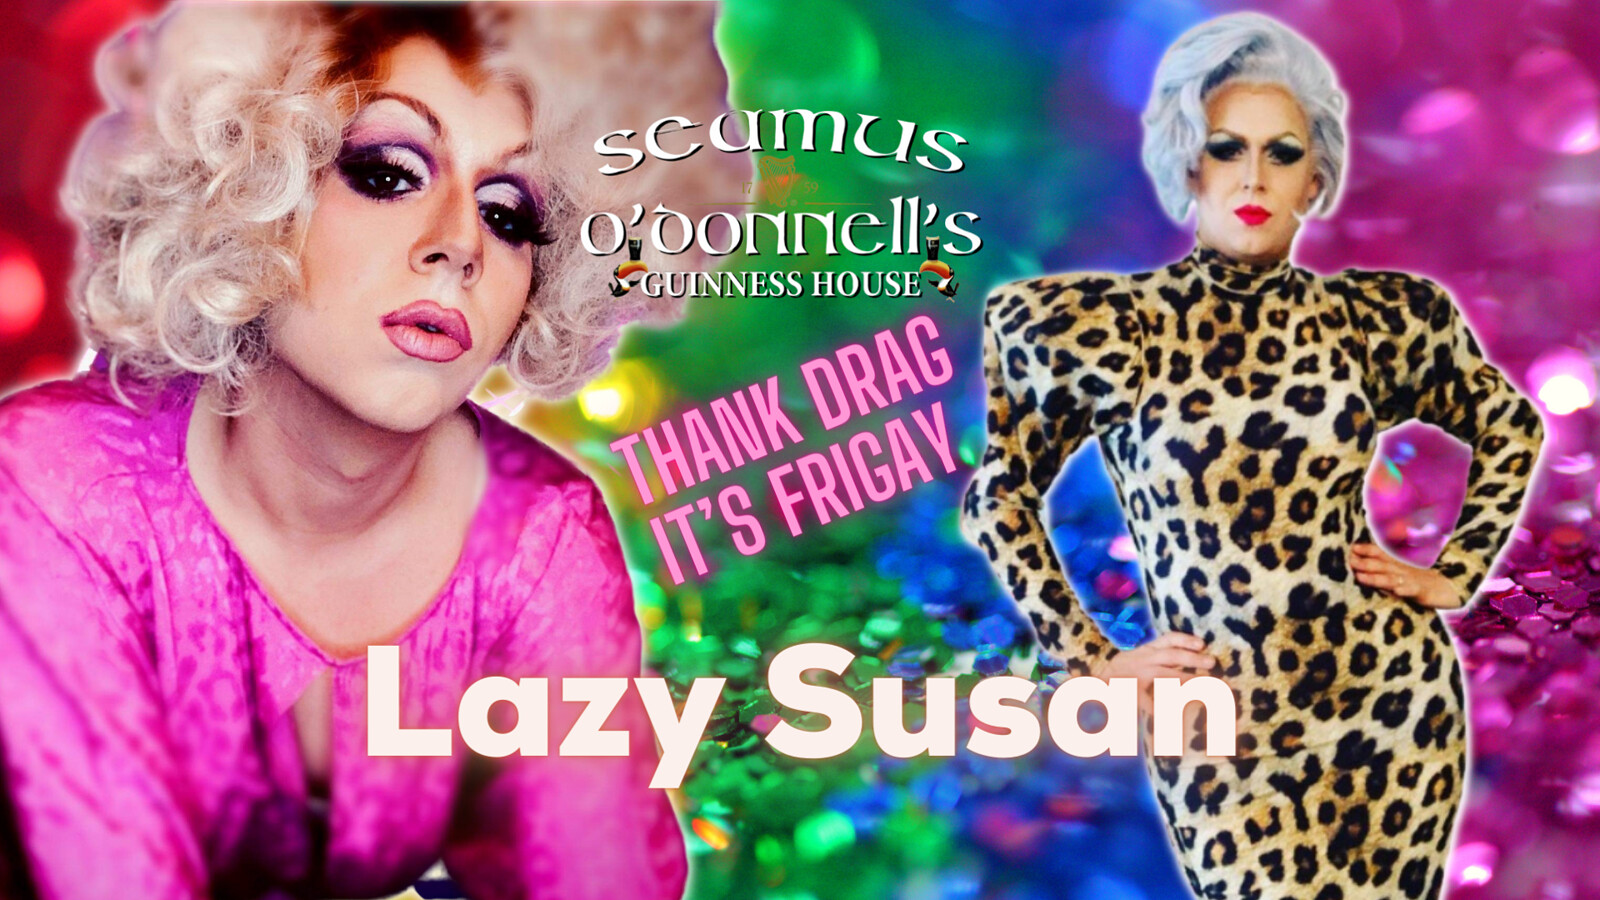 Thank Drag it's FriGay - Lazy Susan at Seamus O'Donnell's